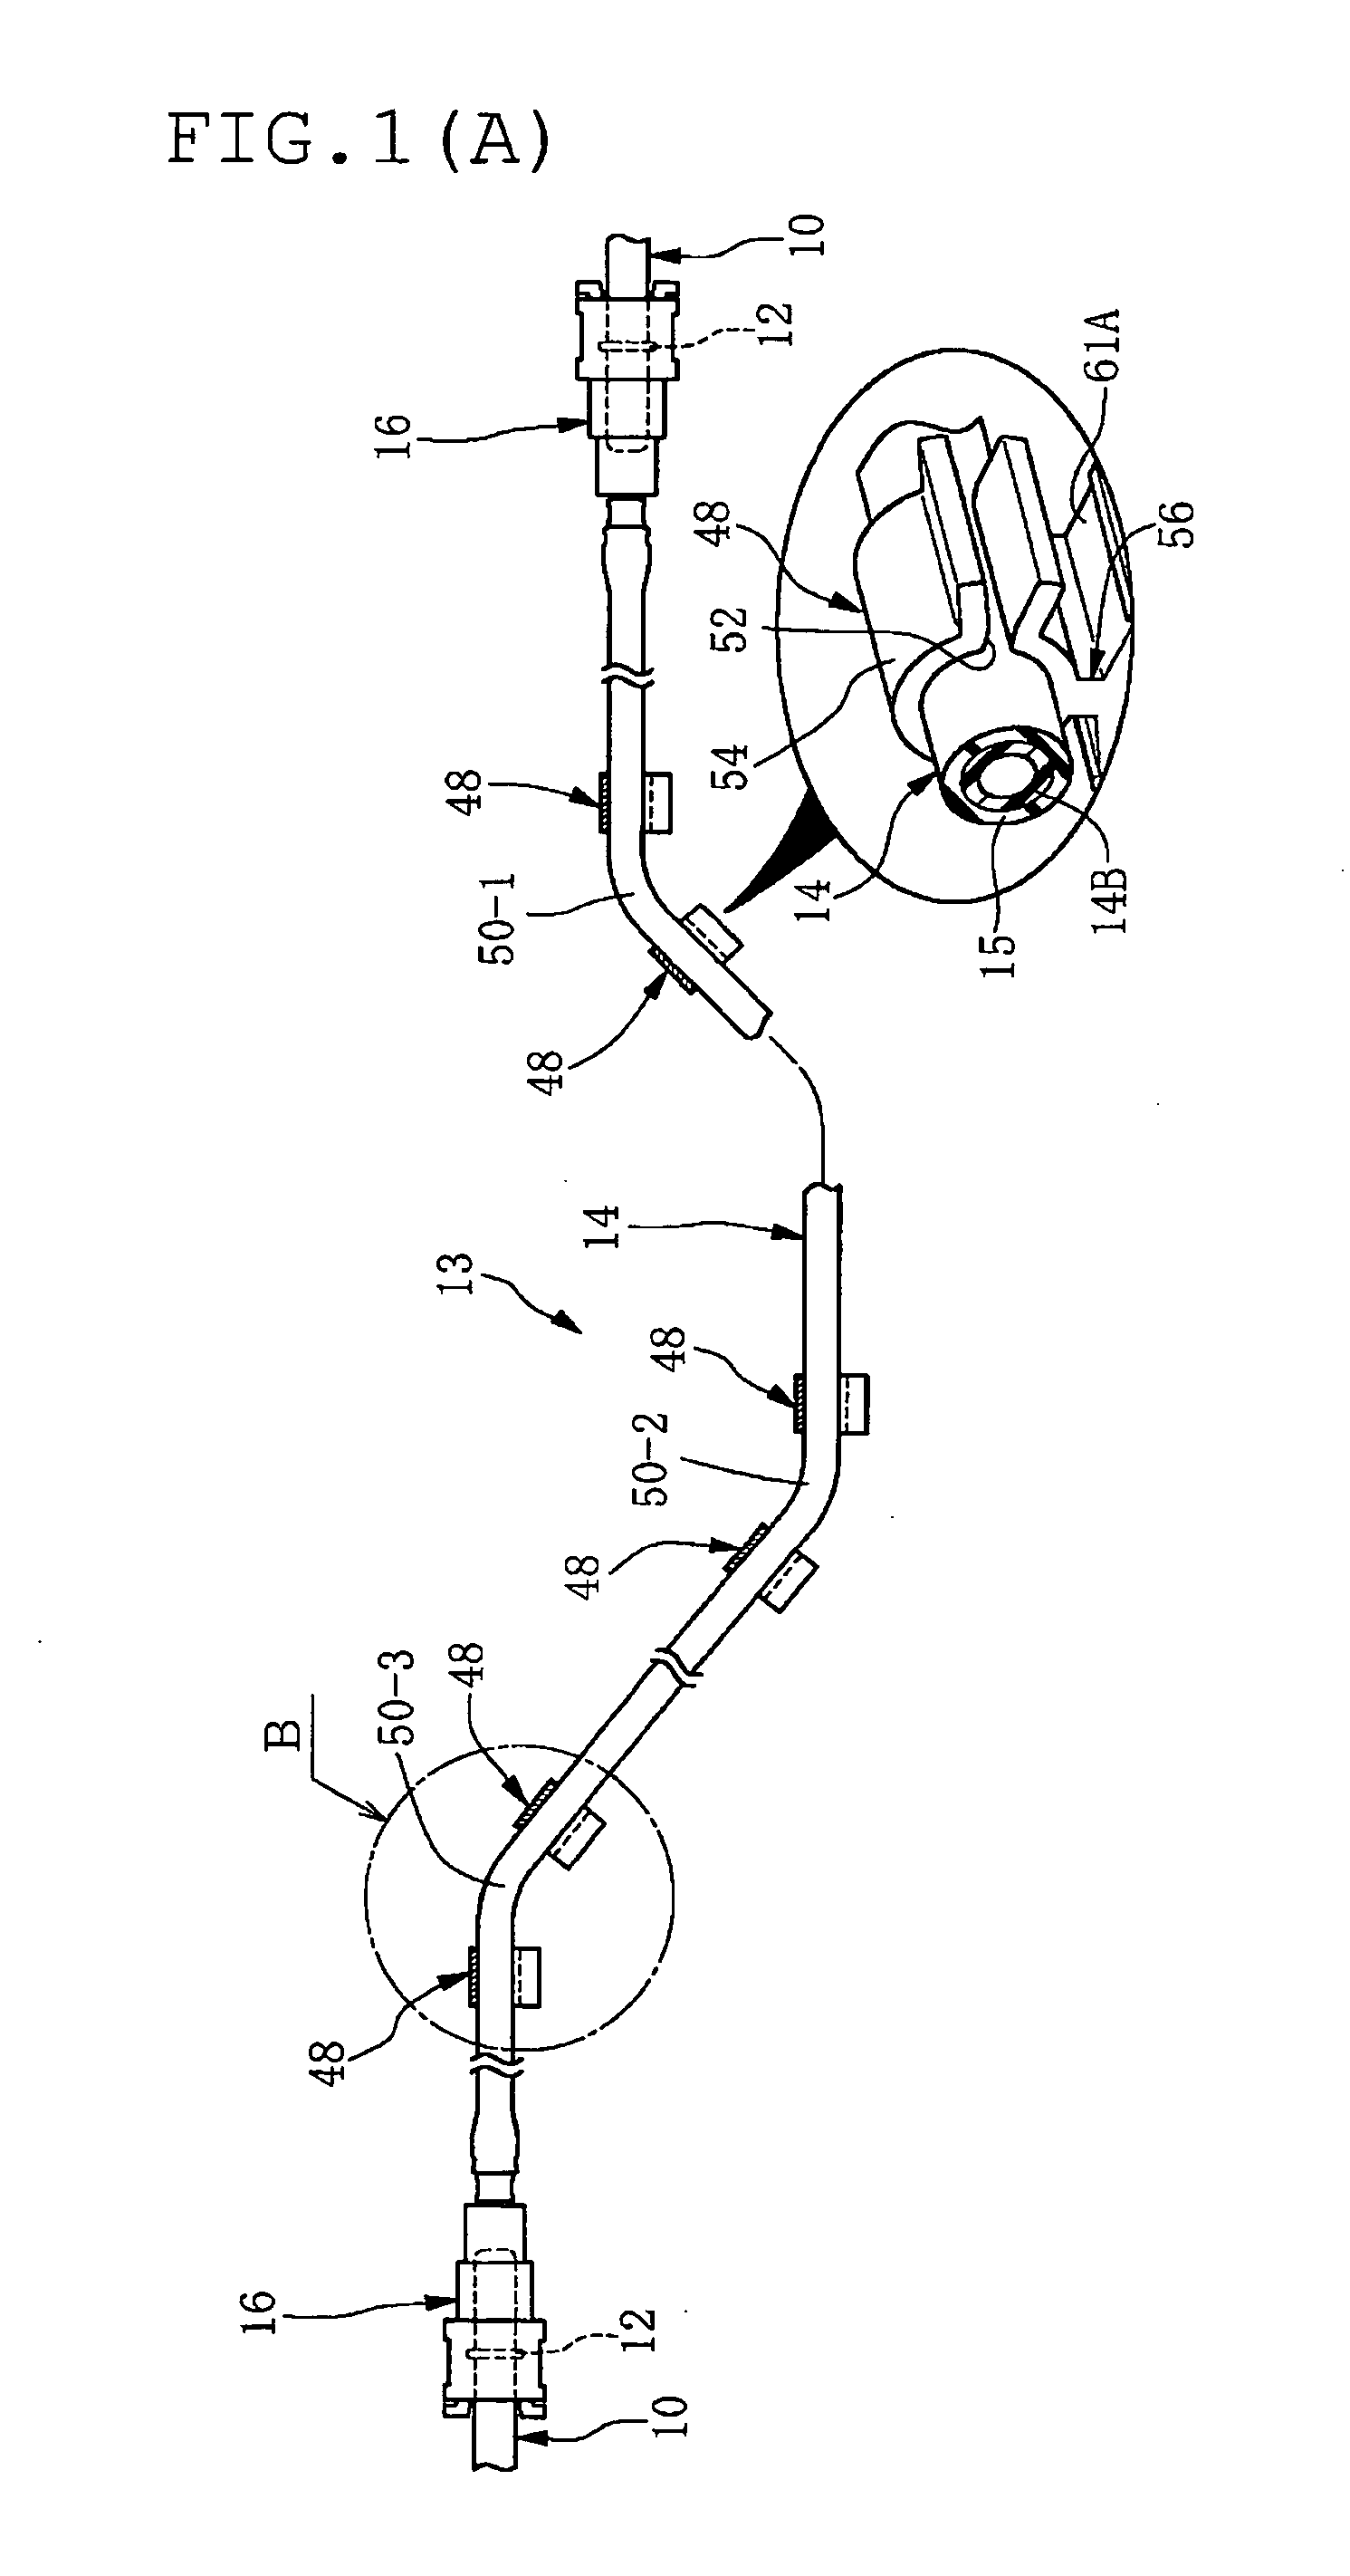 Piping unit for transporting fuel